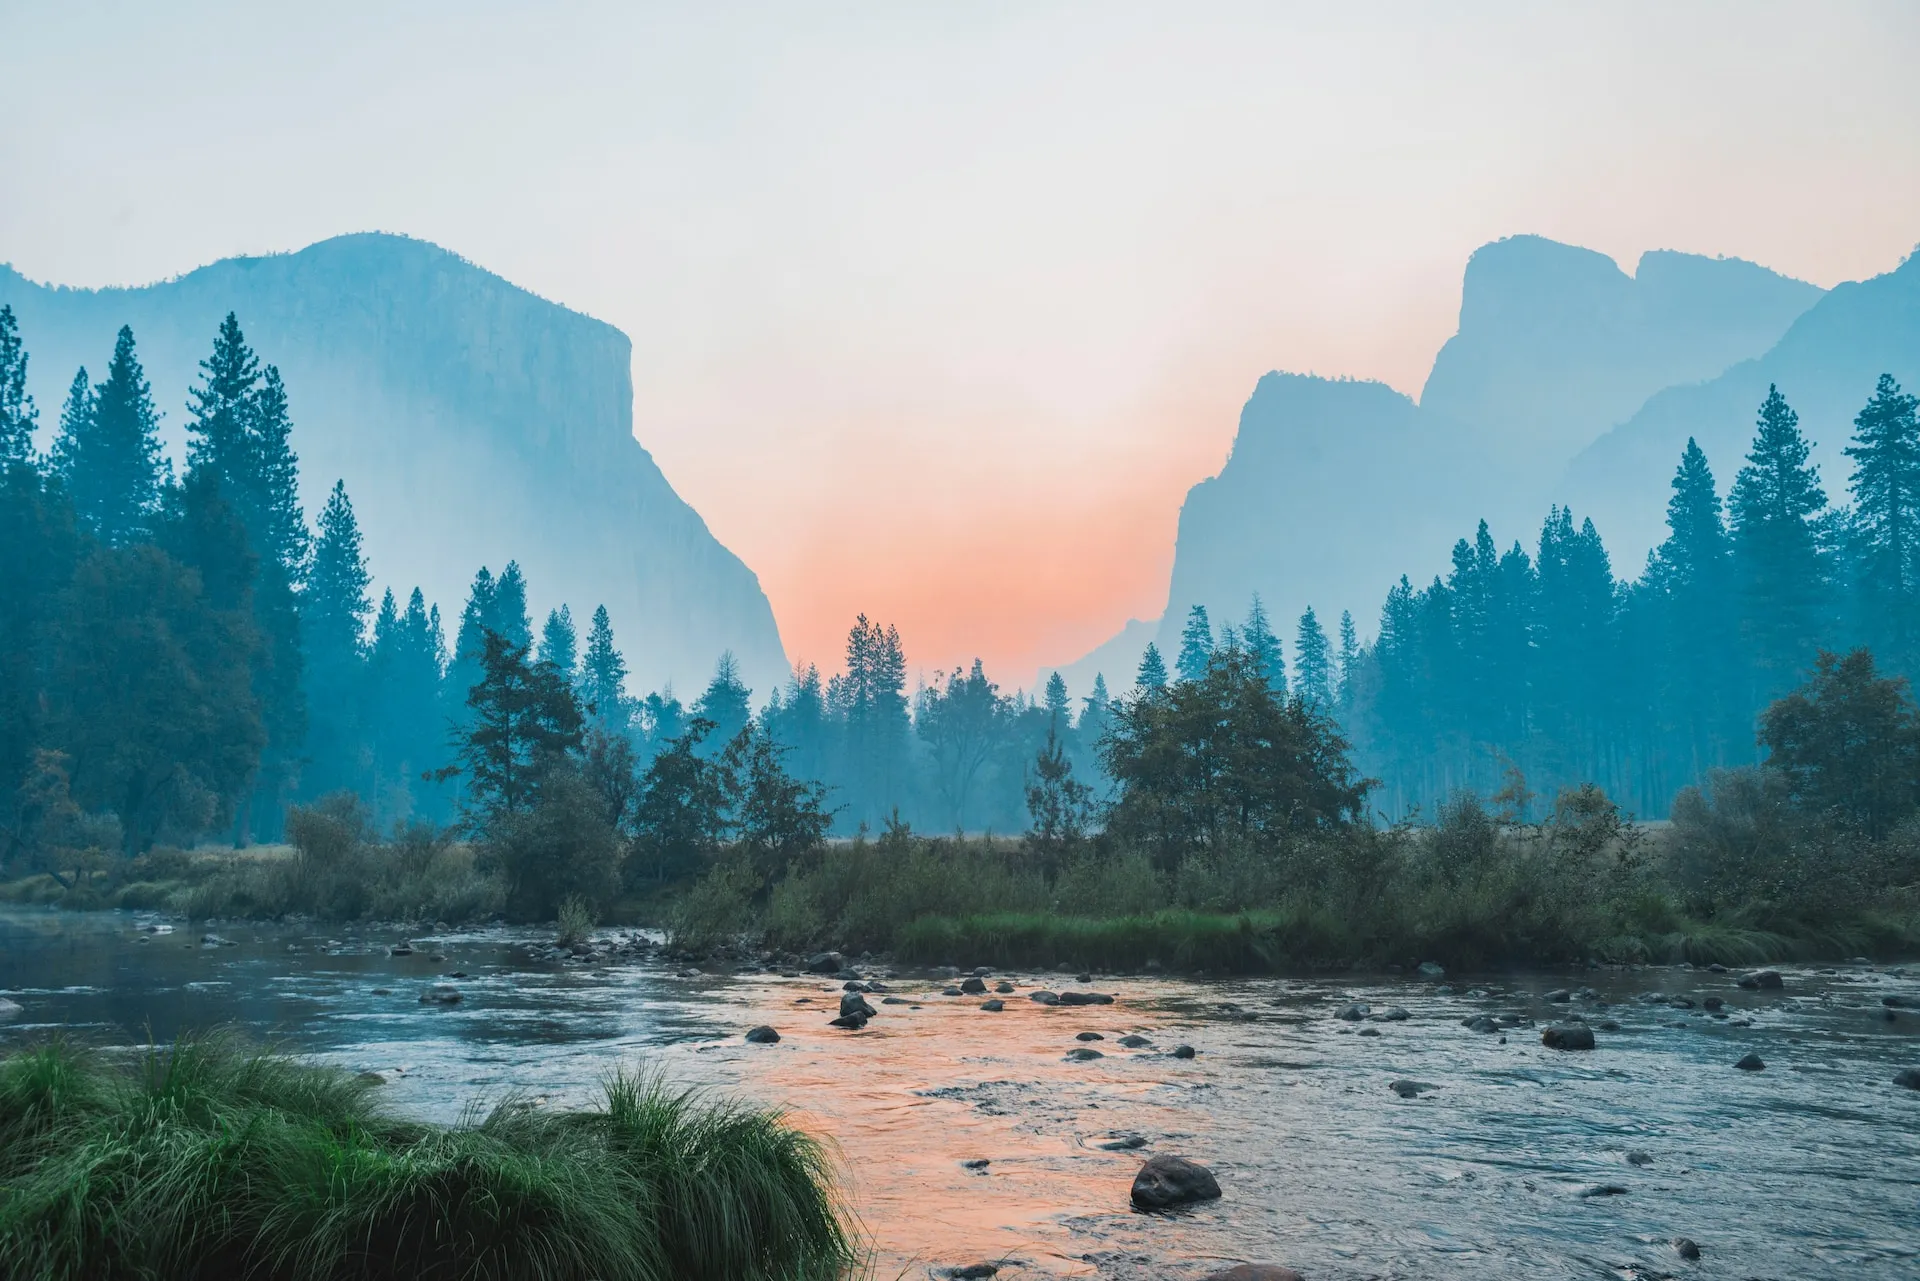 Post image: Body of water surrounded by trees in Yosemite